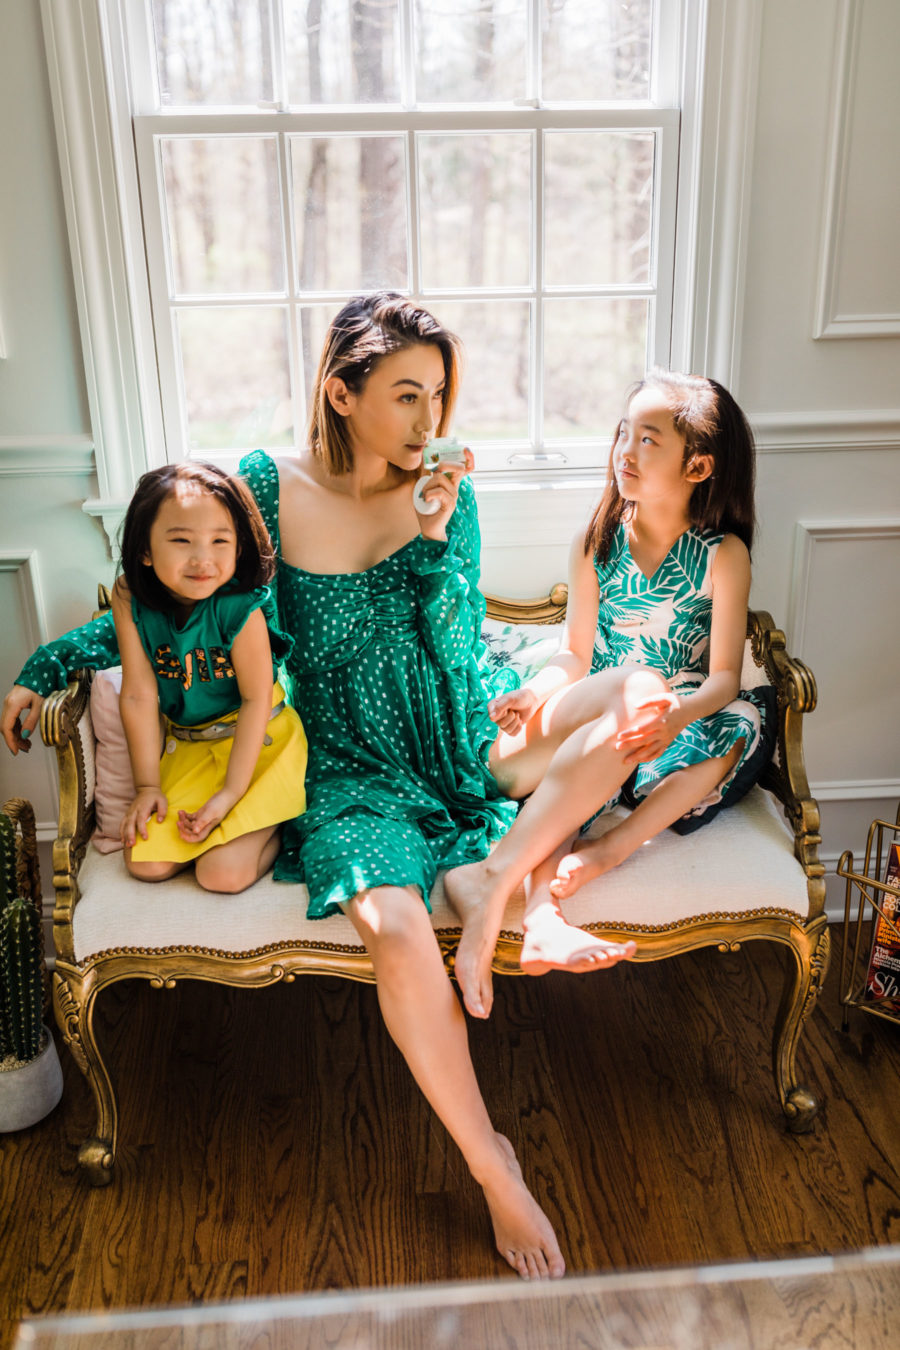 celebrate mother's day at home with a spa day // Jessica Wang - Notjessfashion.com